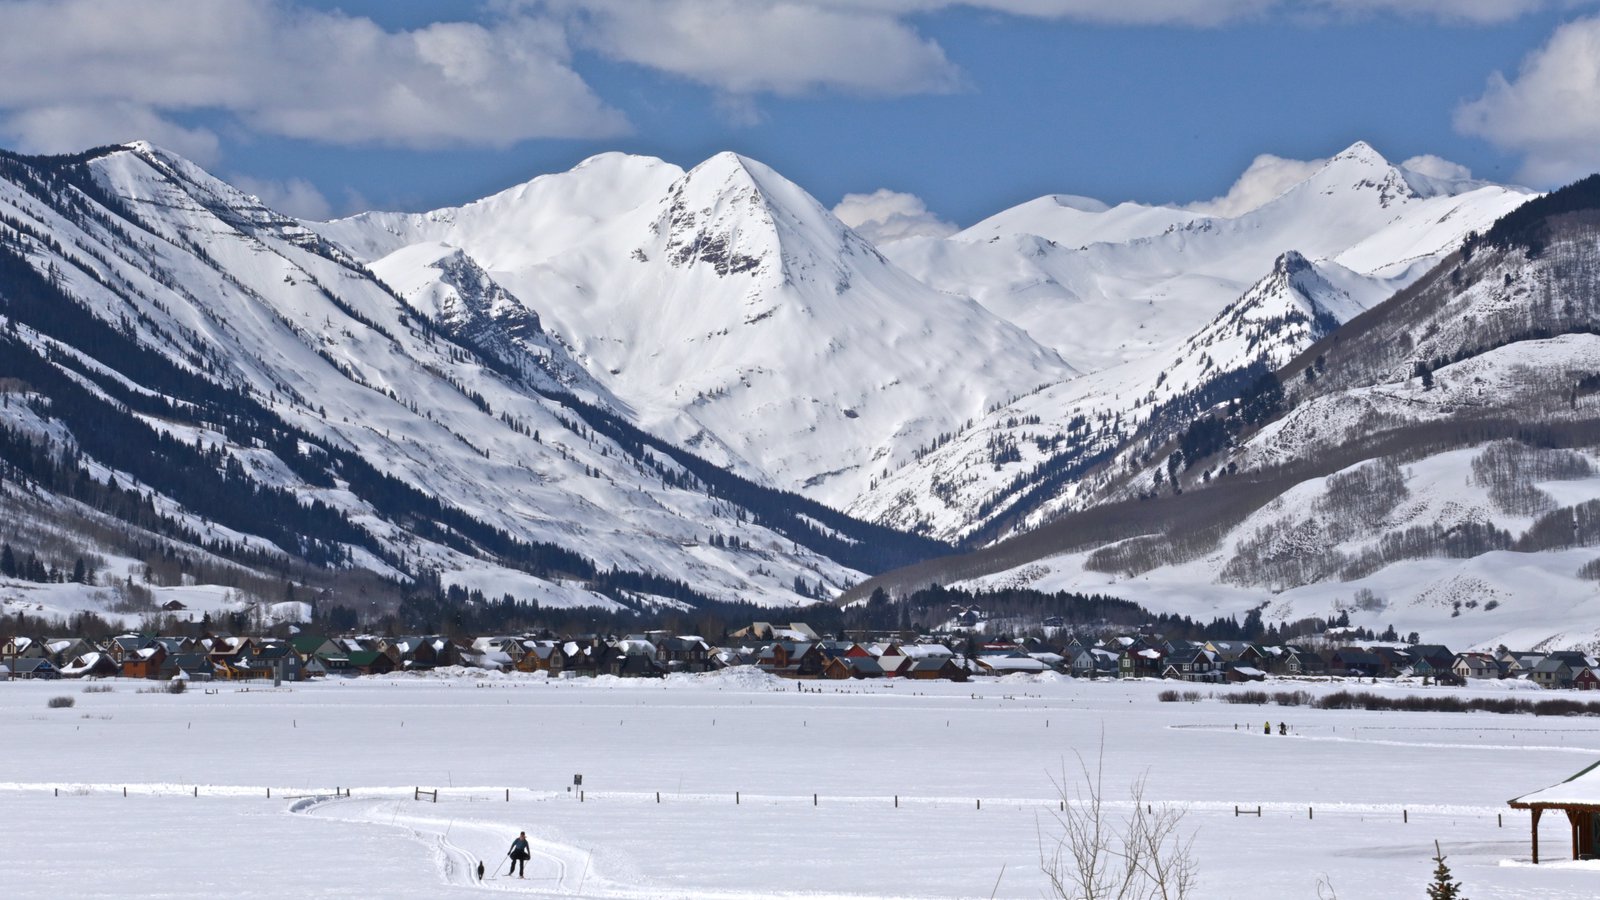 Crested Butte is one of the resorts bought by Vail Resorts. View of Gothic Mountain in the backdrop of Mount Crested Butte. 